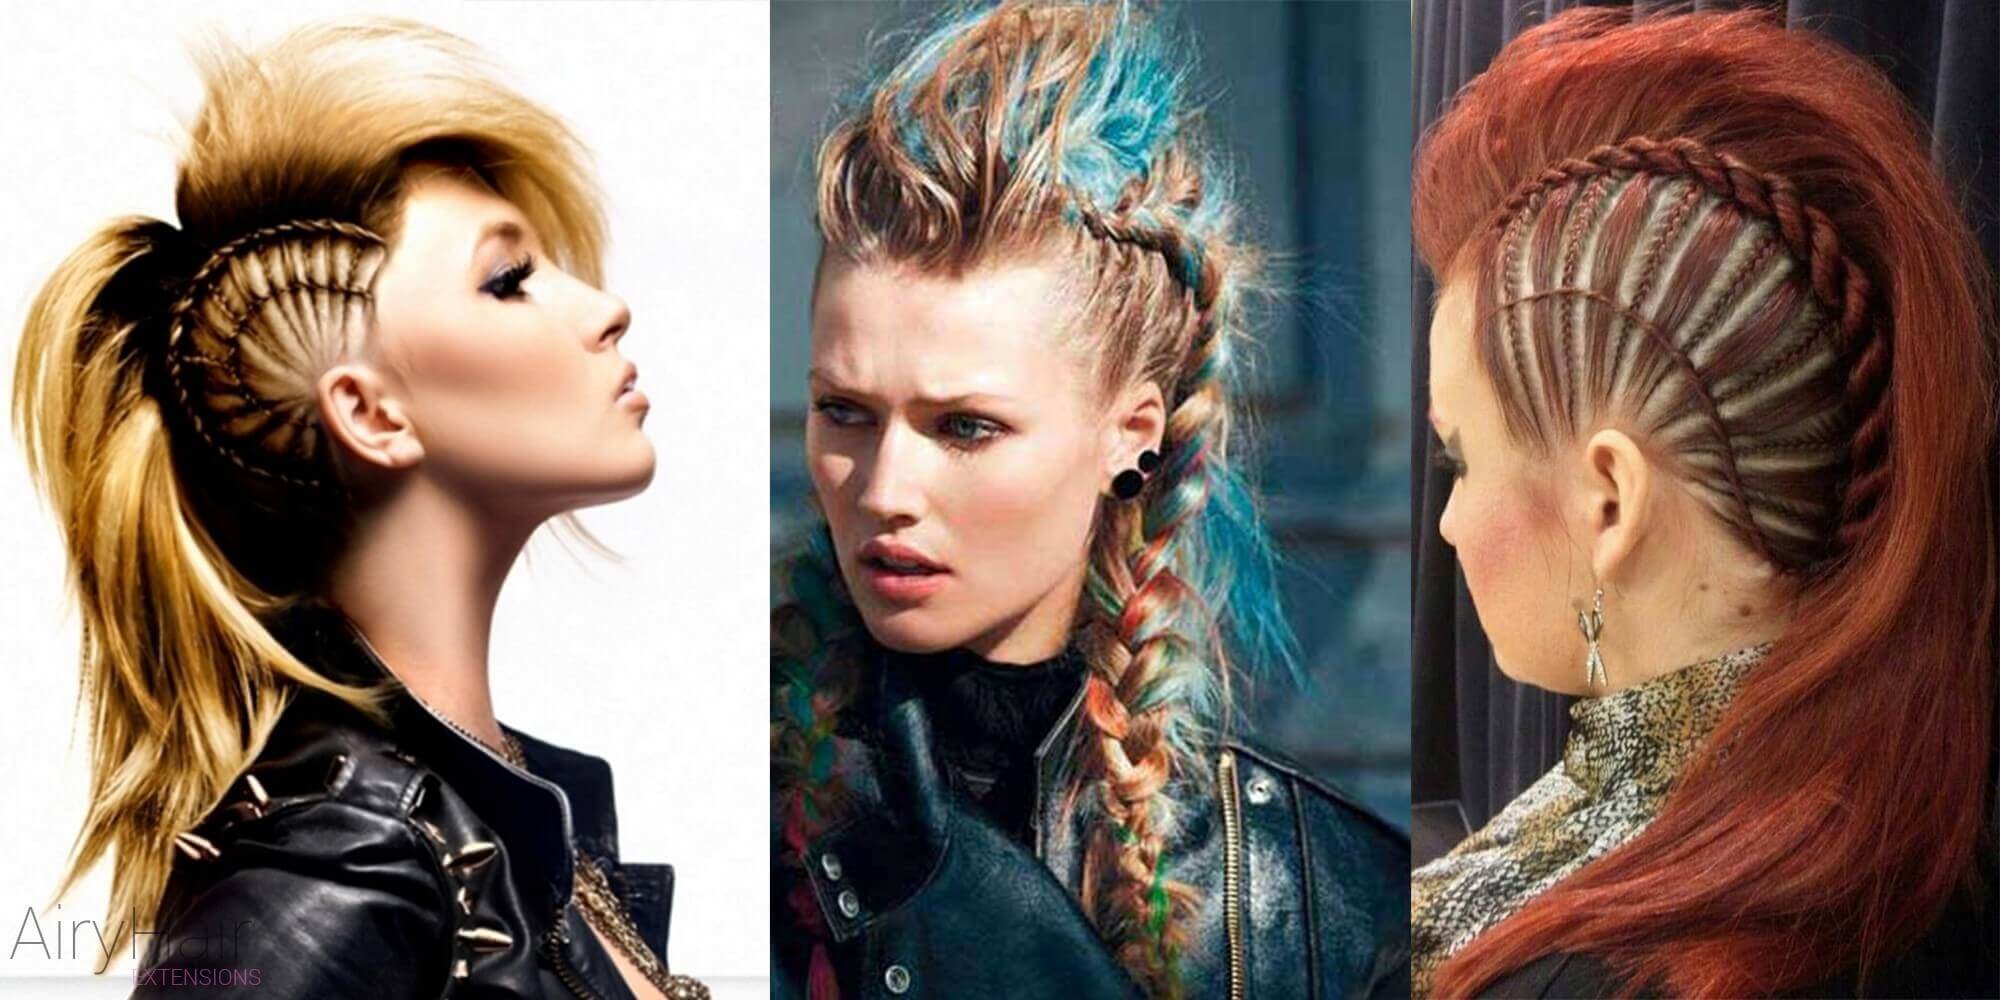 Punky hairstyles for men and women | Bright hair colors